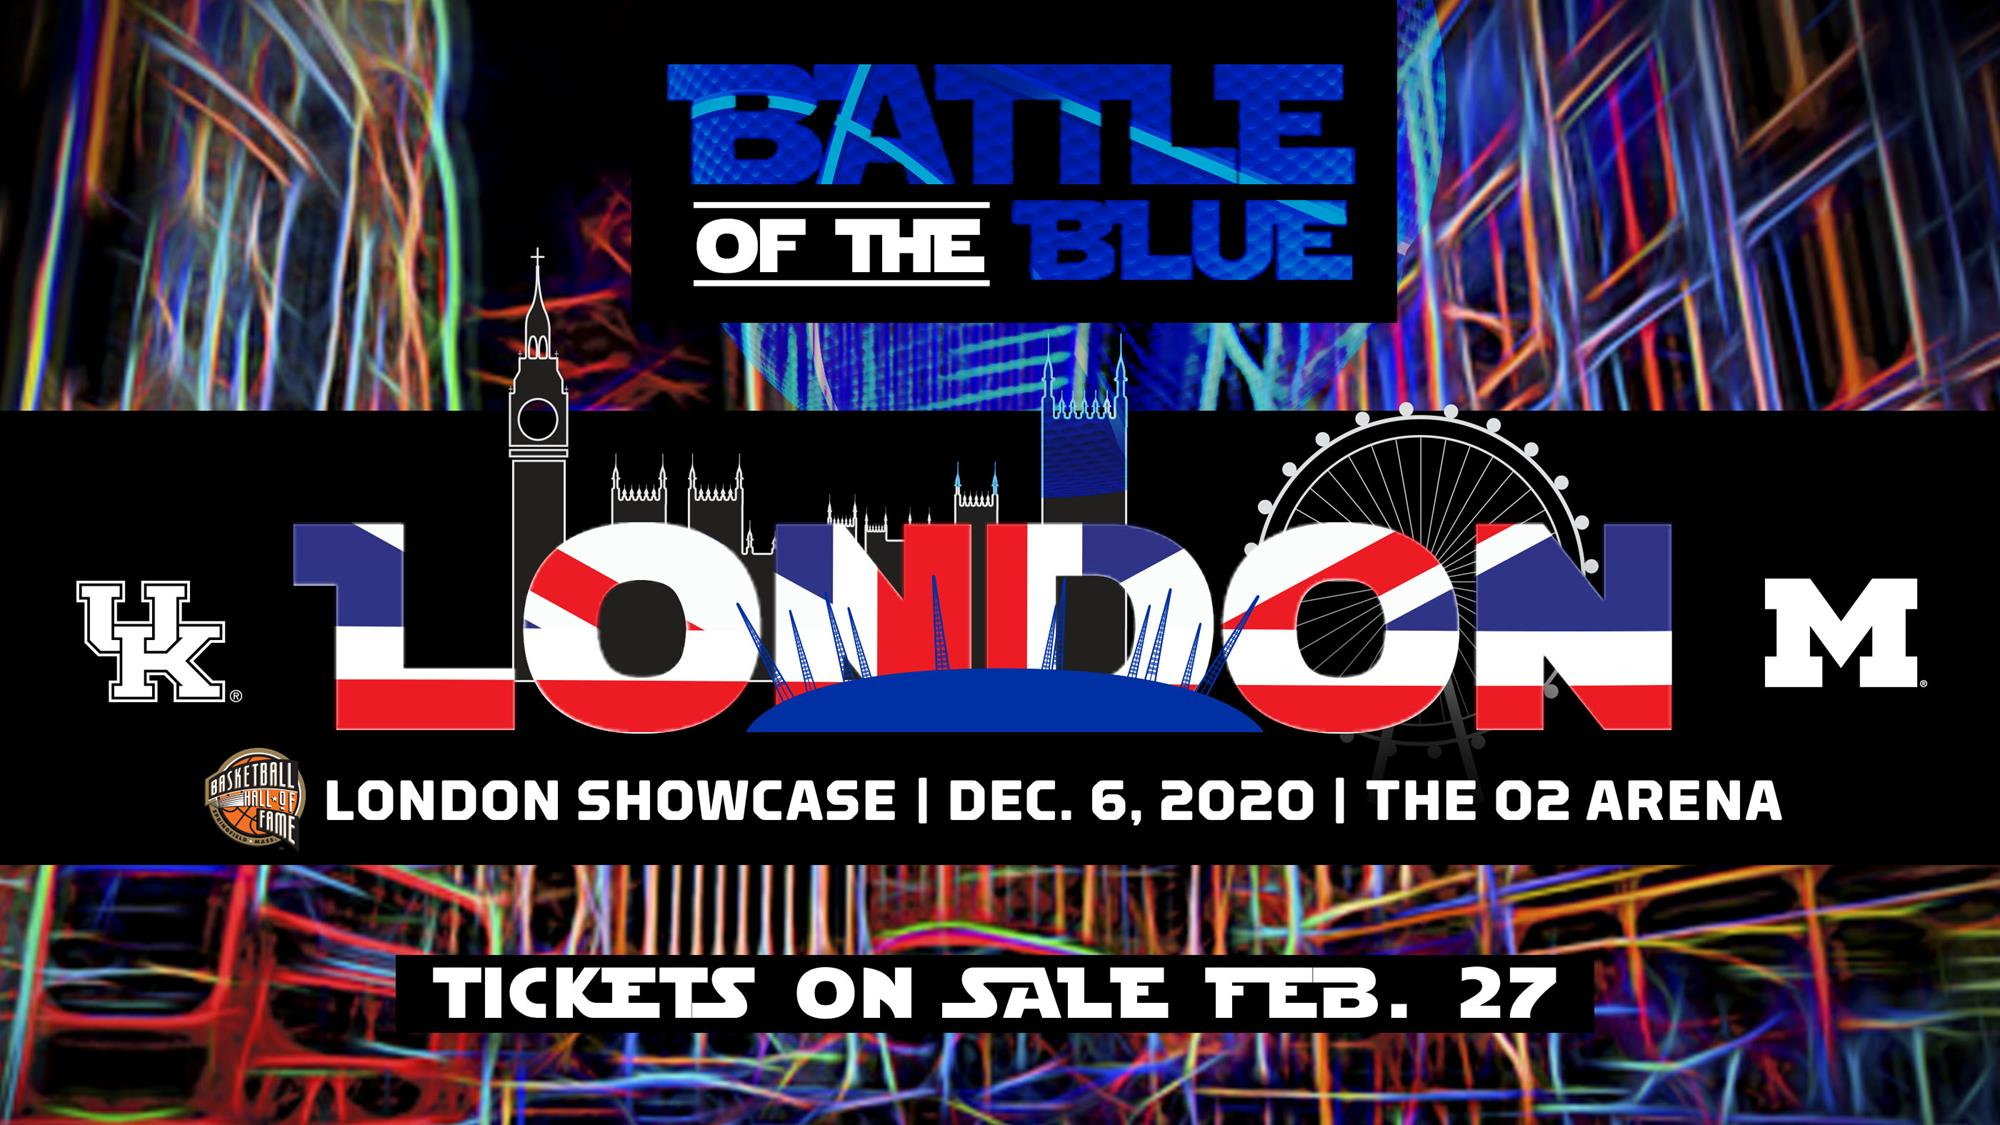 UK-Michigan Game in London Set for Dec. 6; Tickets on Sale Feb. 27